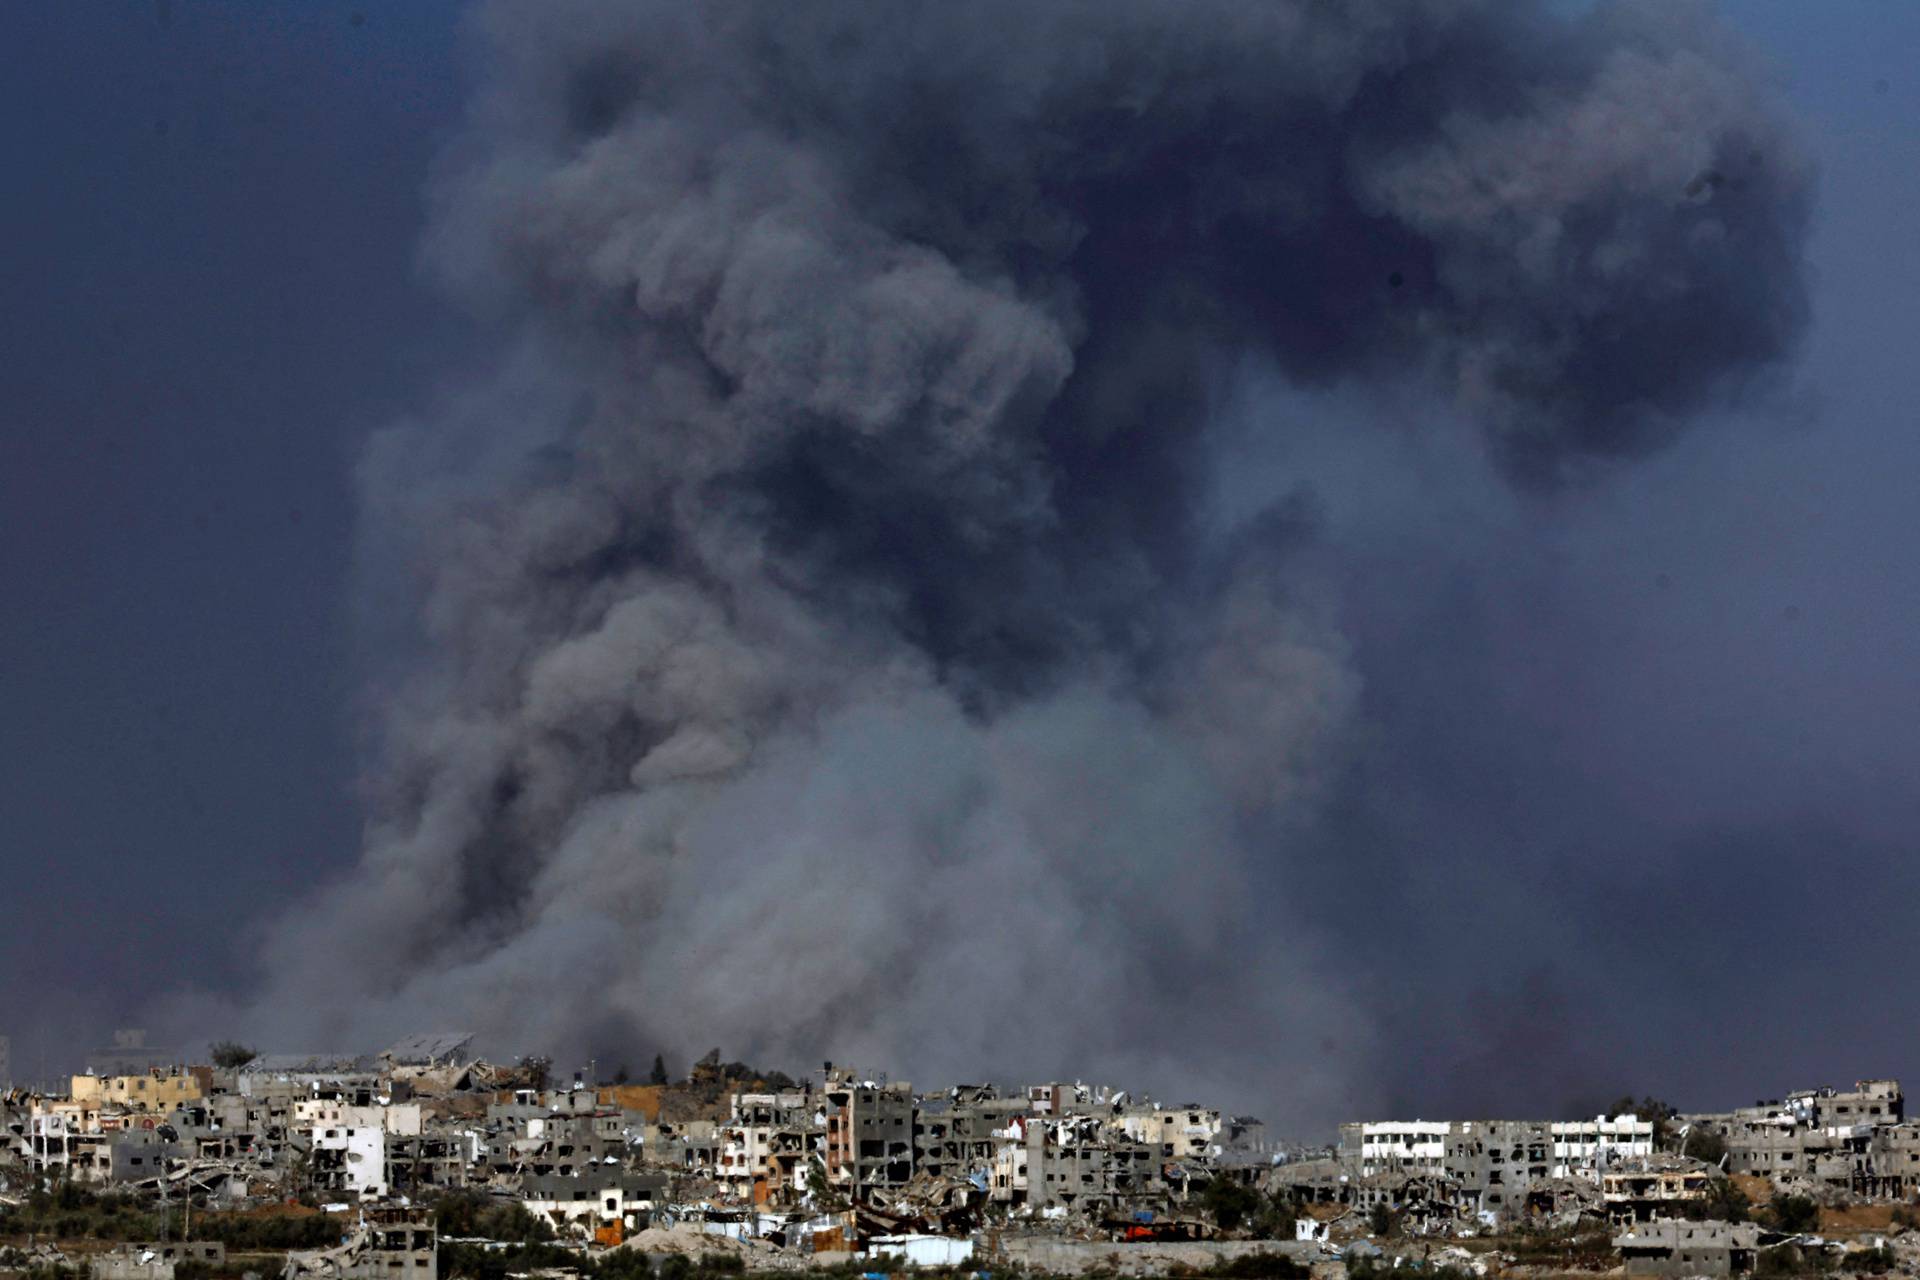 Smoke and debris rises over Gaza as seen from southern Israel